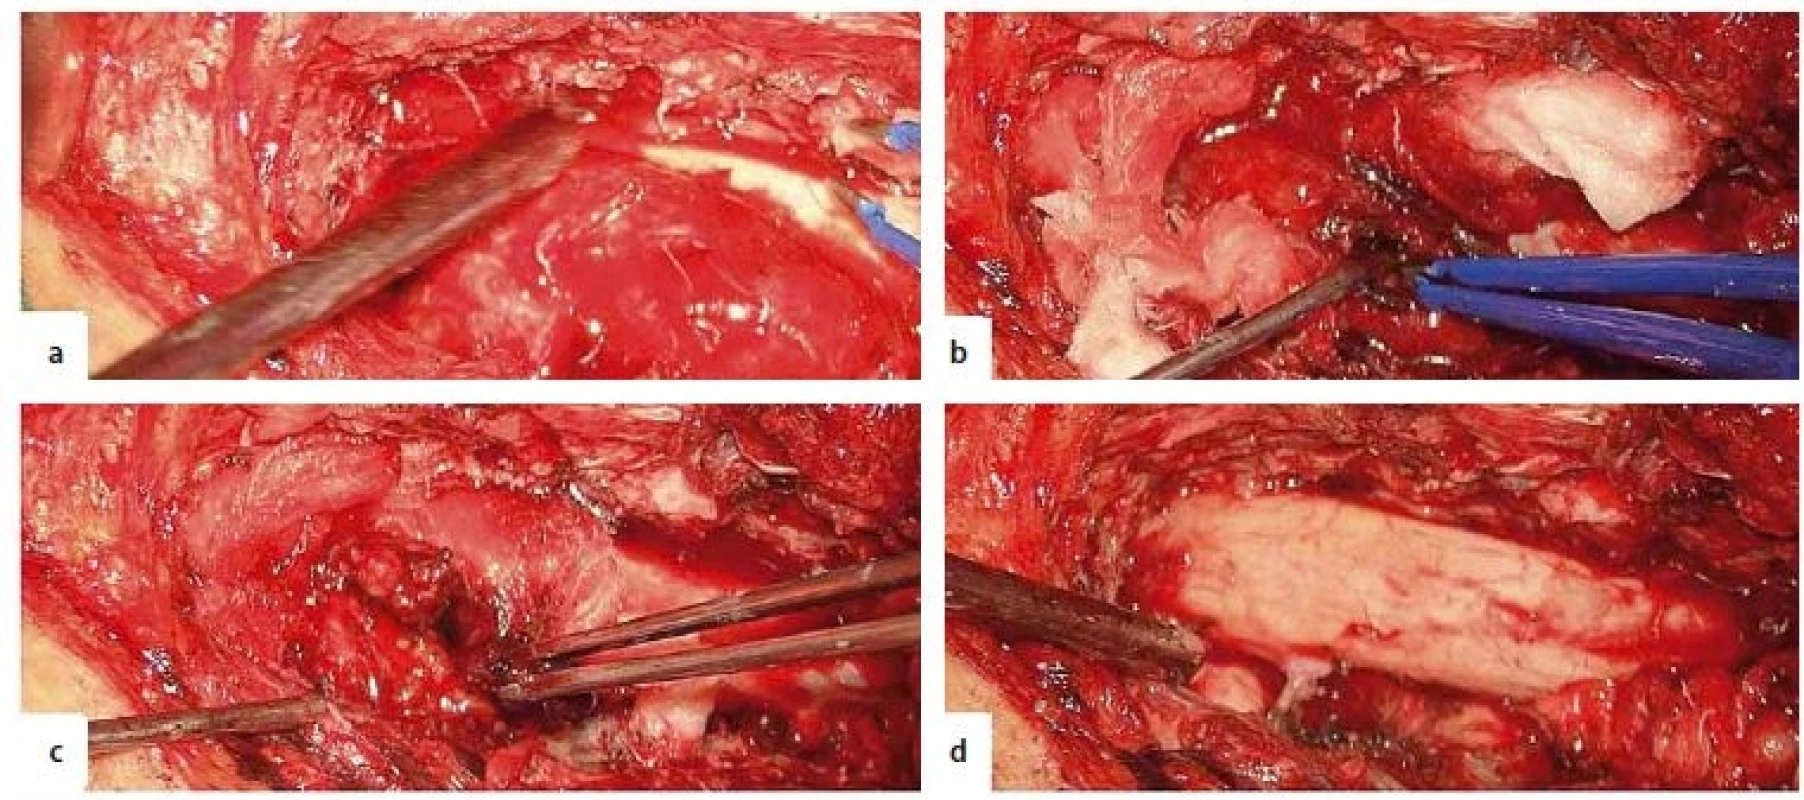 Intraoperative images. A – encapsulated, extramedullary tumour, B – fenestration in the tumour capsule, C – evacuation of an
intracapsular haematoma, D – final aspect with total resection of the tumour.